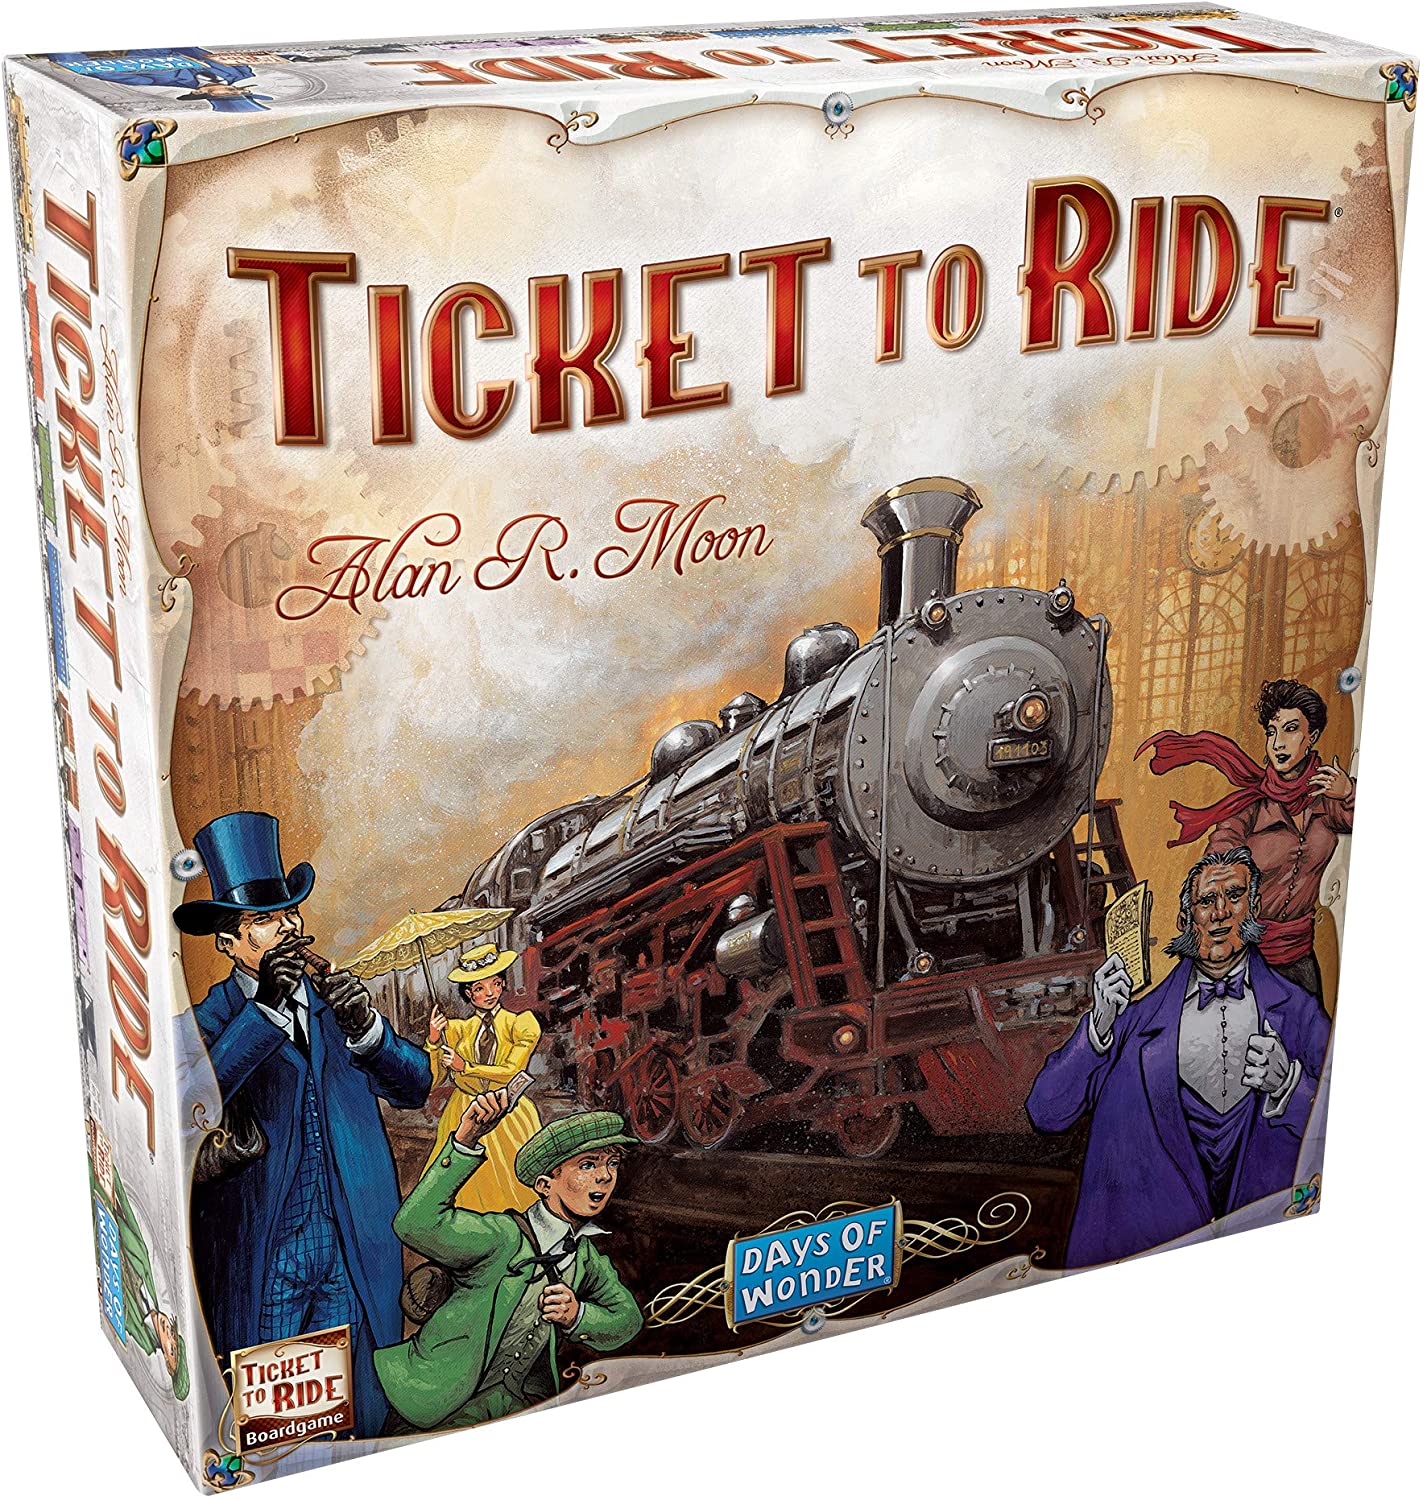 Ticket to Ride Broad Game $4